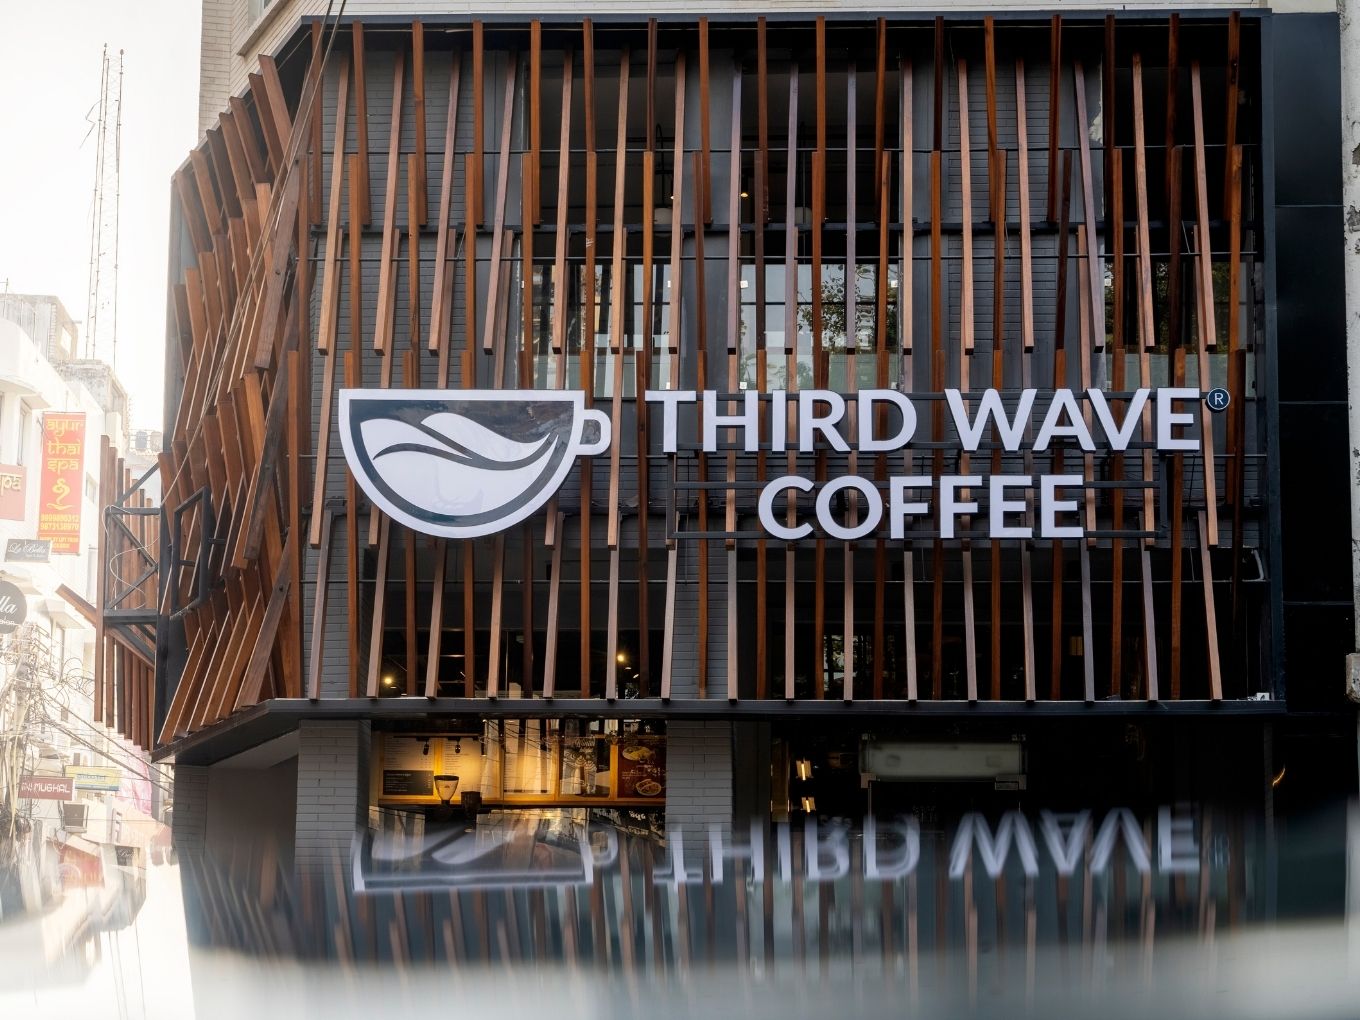 Third Wave Coffee’s cofounder and current CEO Sushant Goel will transition from his current role to a member of the board